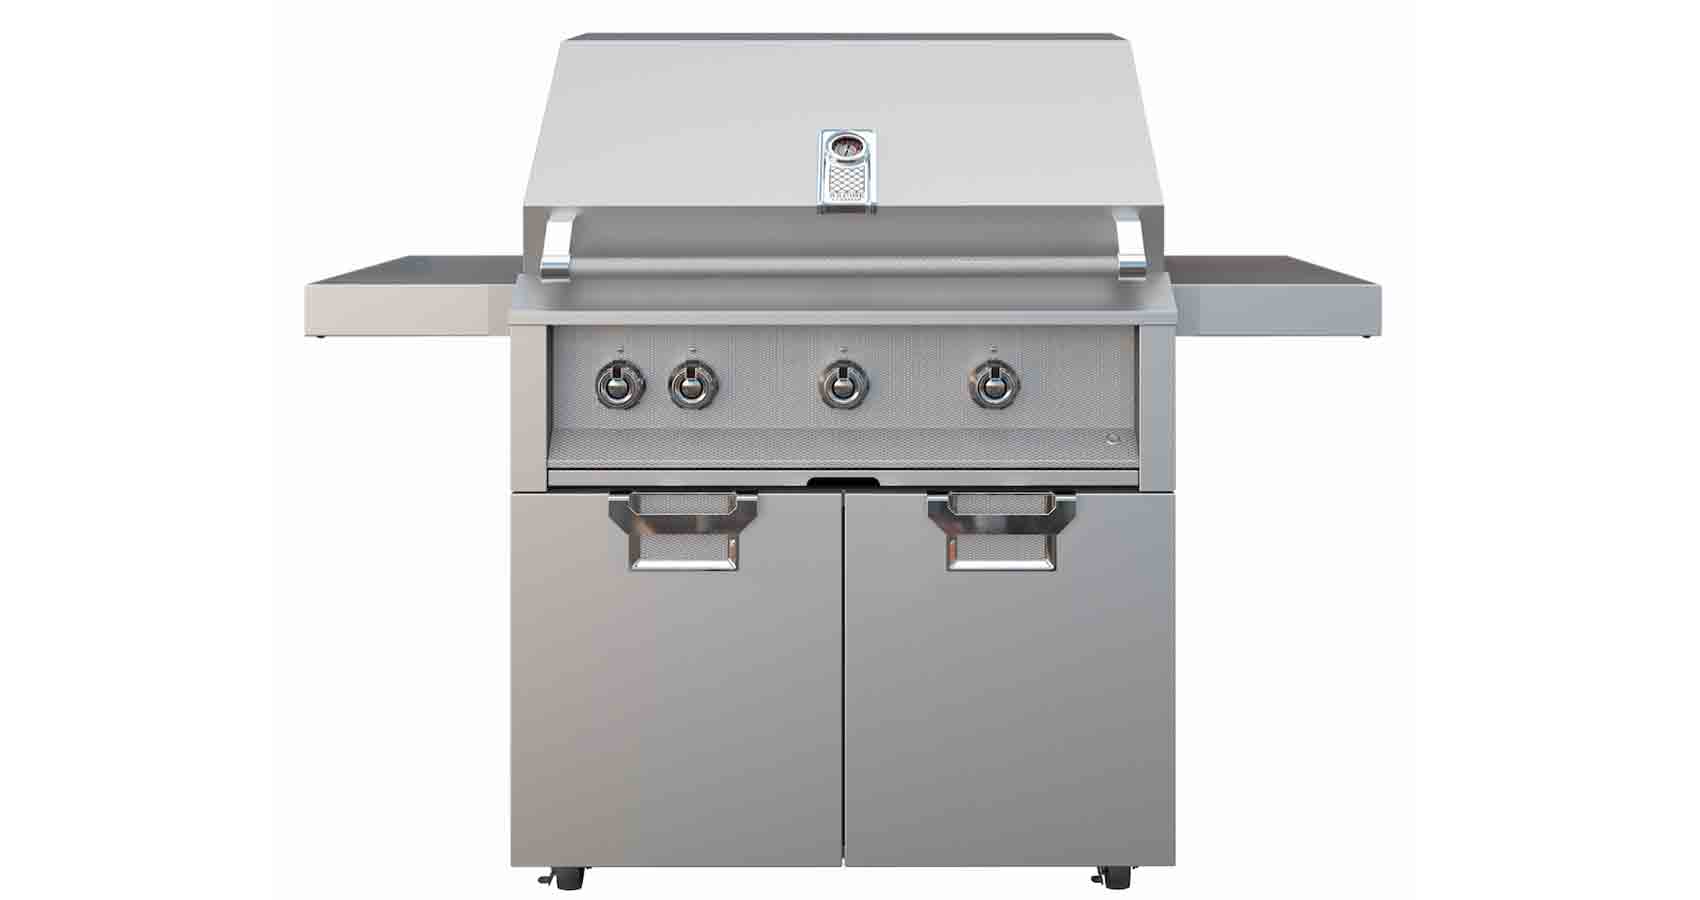 Hestan-Outdoor-Unveils-New-Line-of-Premium,-Residential-Outdoor-Appliances-and-Accessories-at-the-Hearth,-Patio-&-Barbeque-Expo-2017